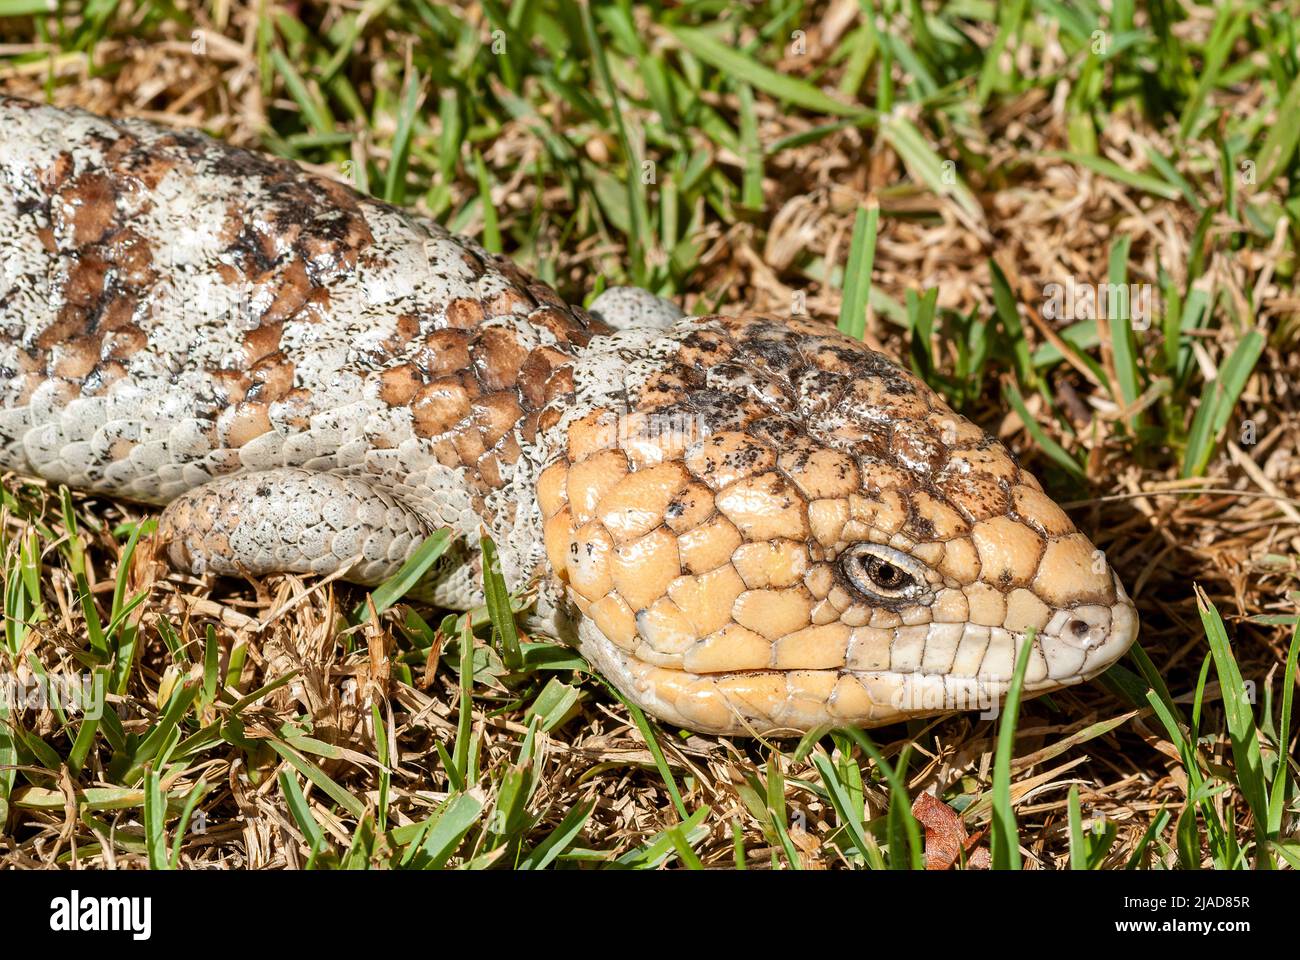 Close-up of a common blue-tongued skink (Tiliqua scincoides) on grass, Australia Stock Photo